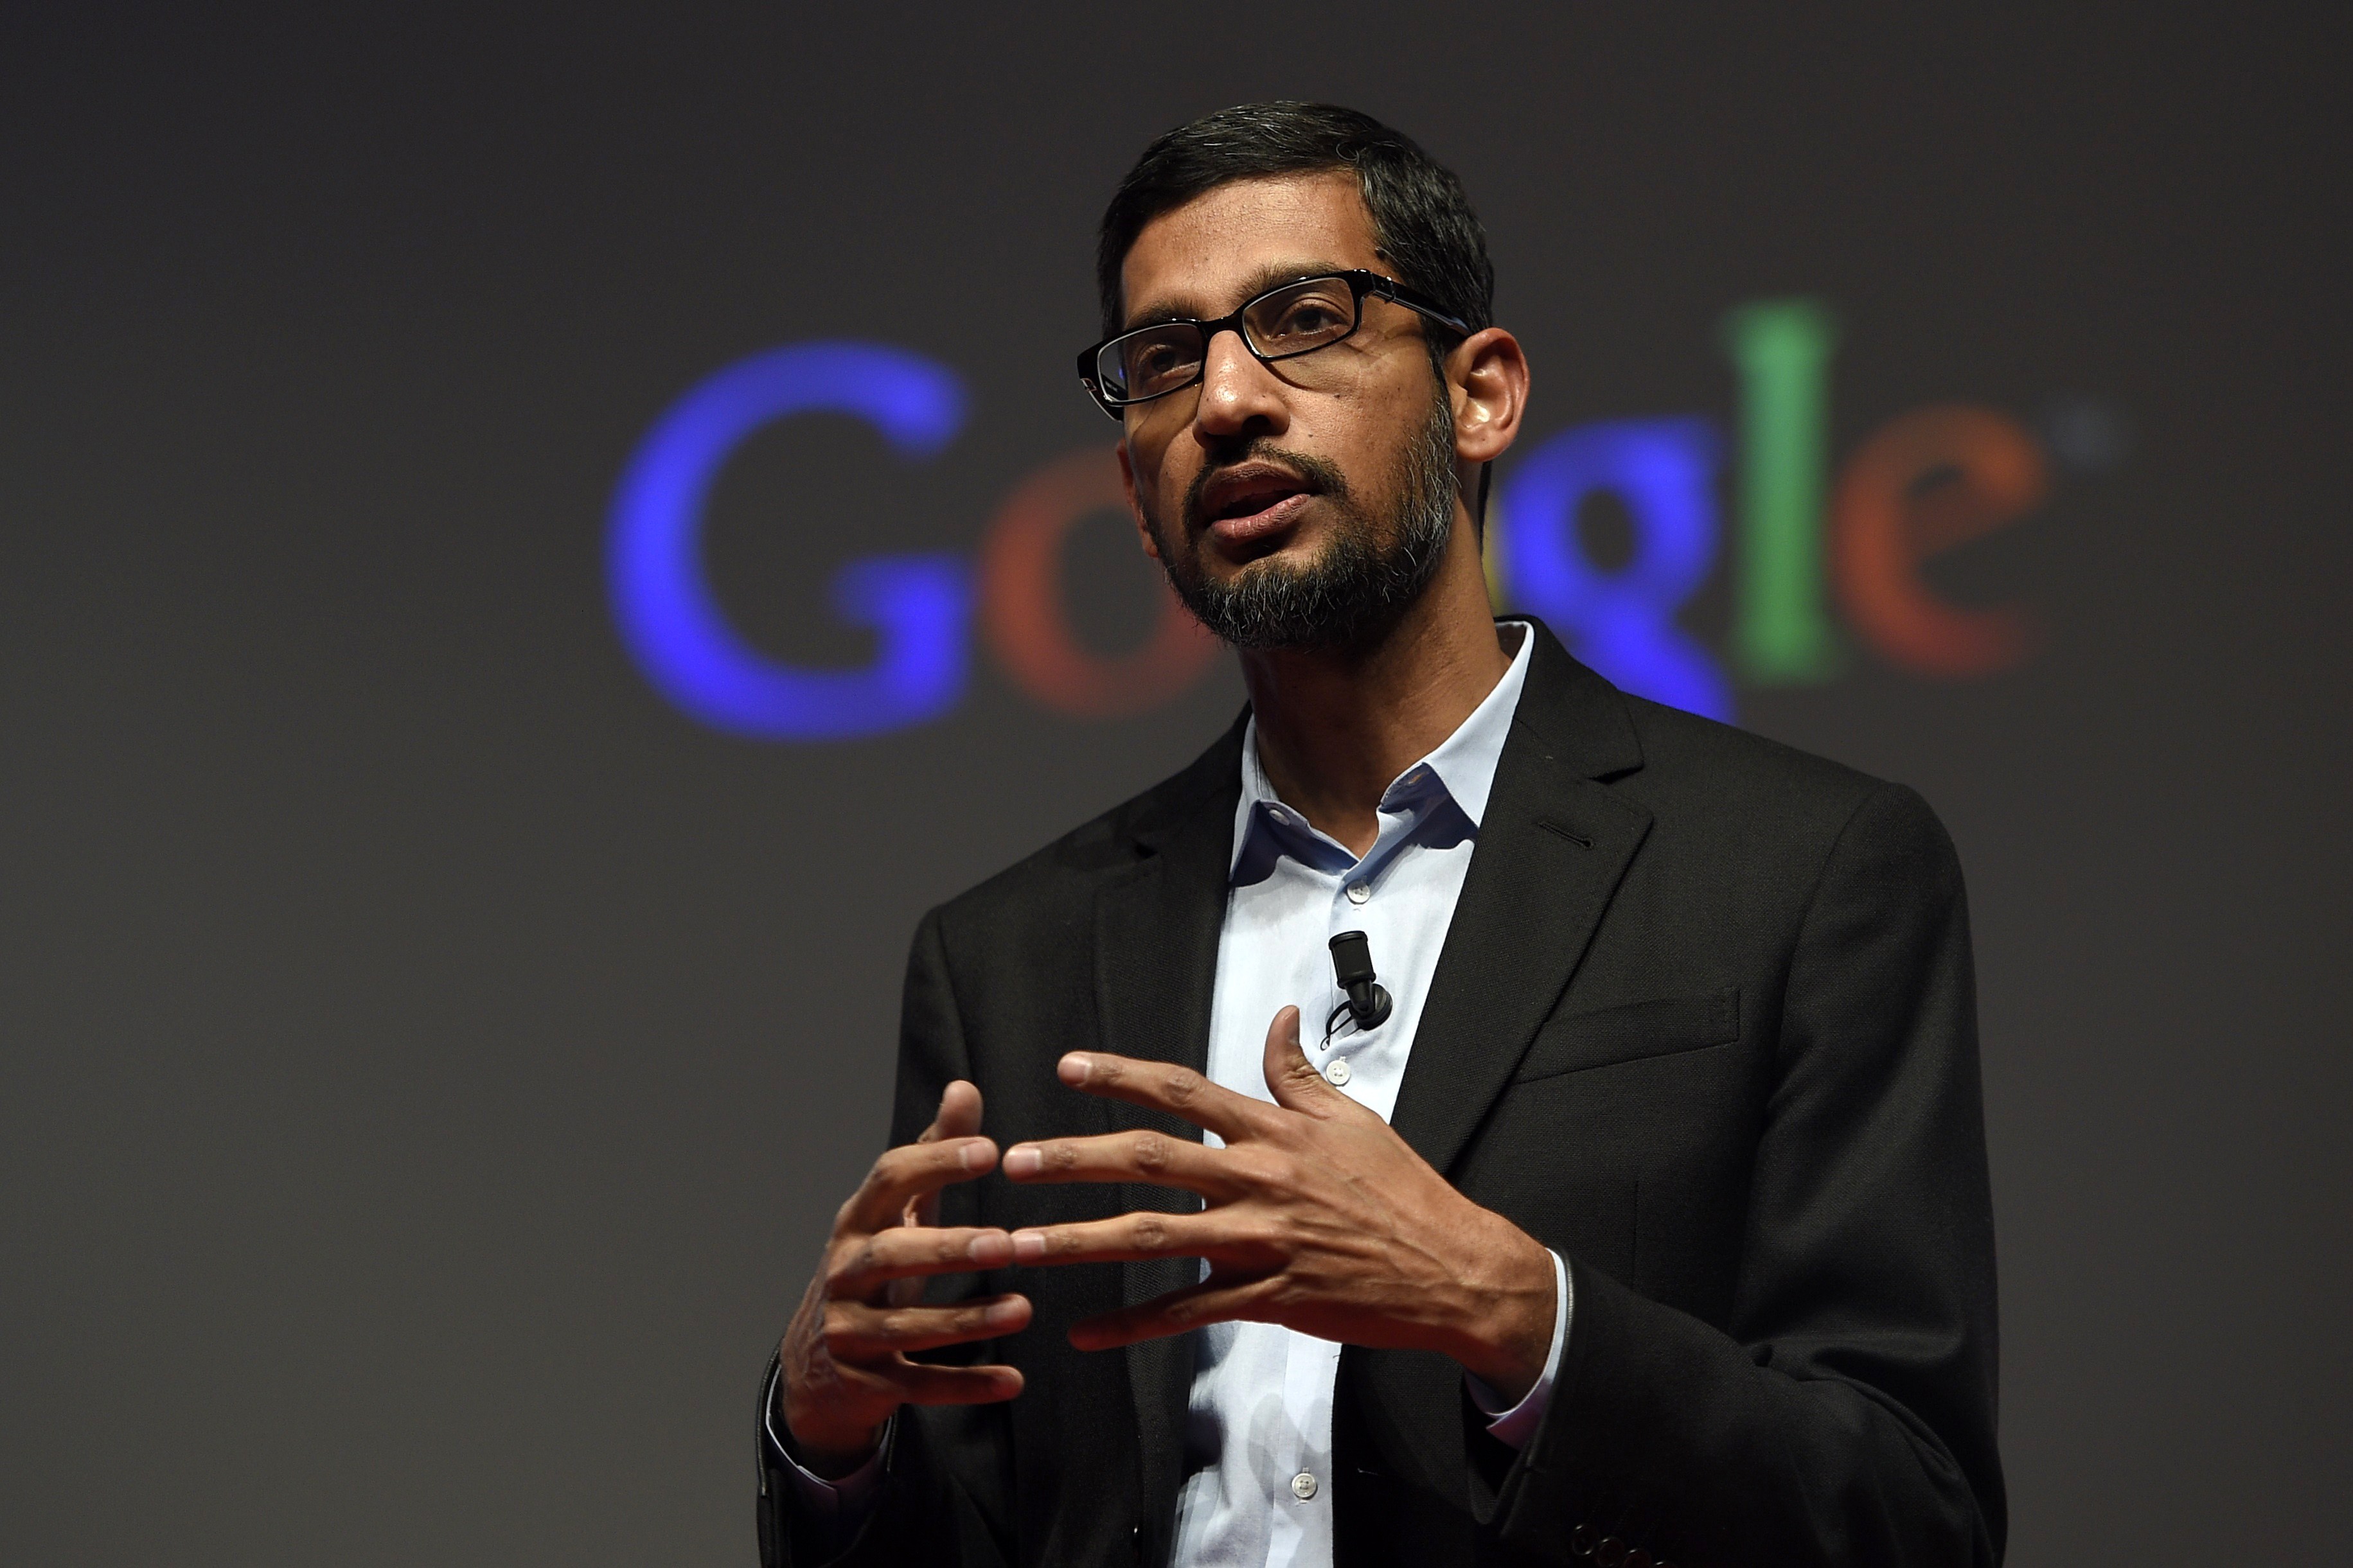 Why Sundar Pichai Matters & How The New Google CEO Gives Hope To